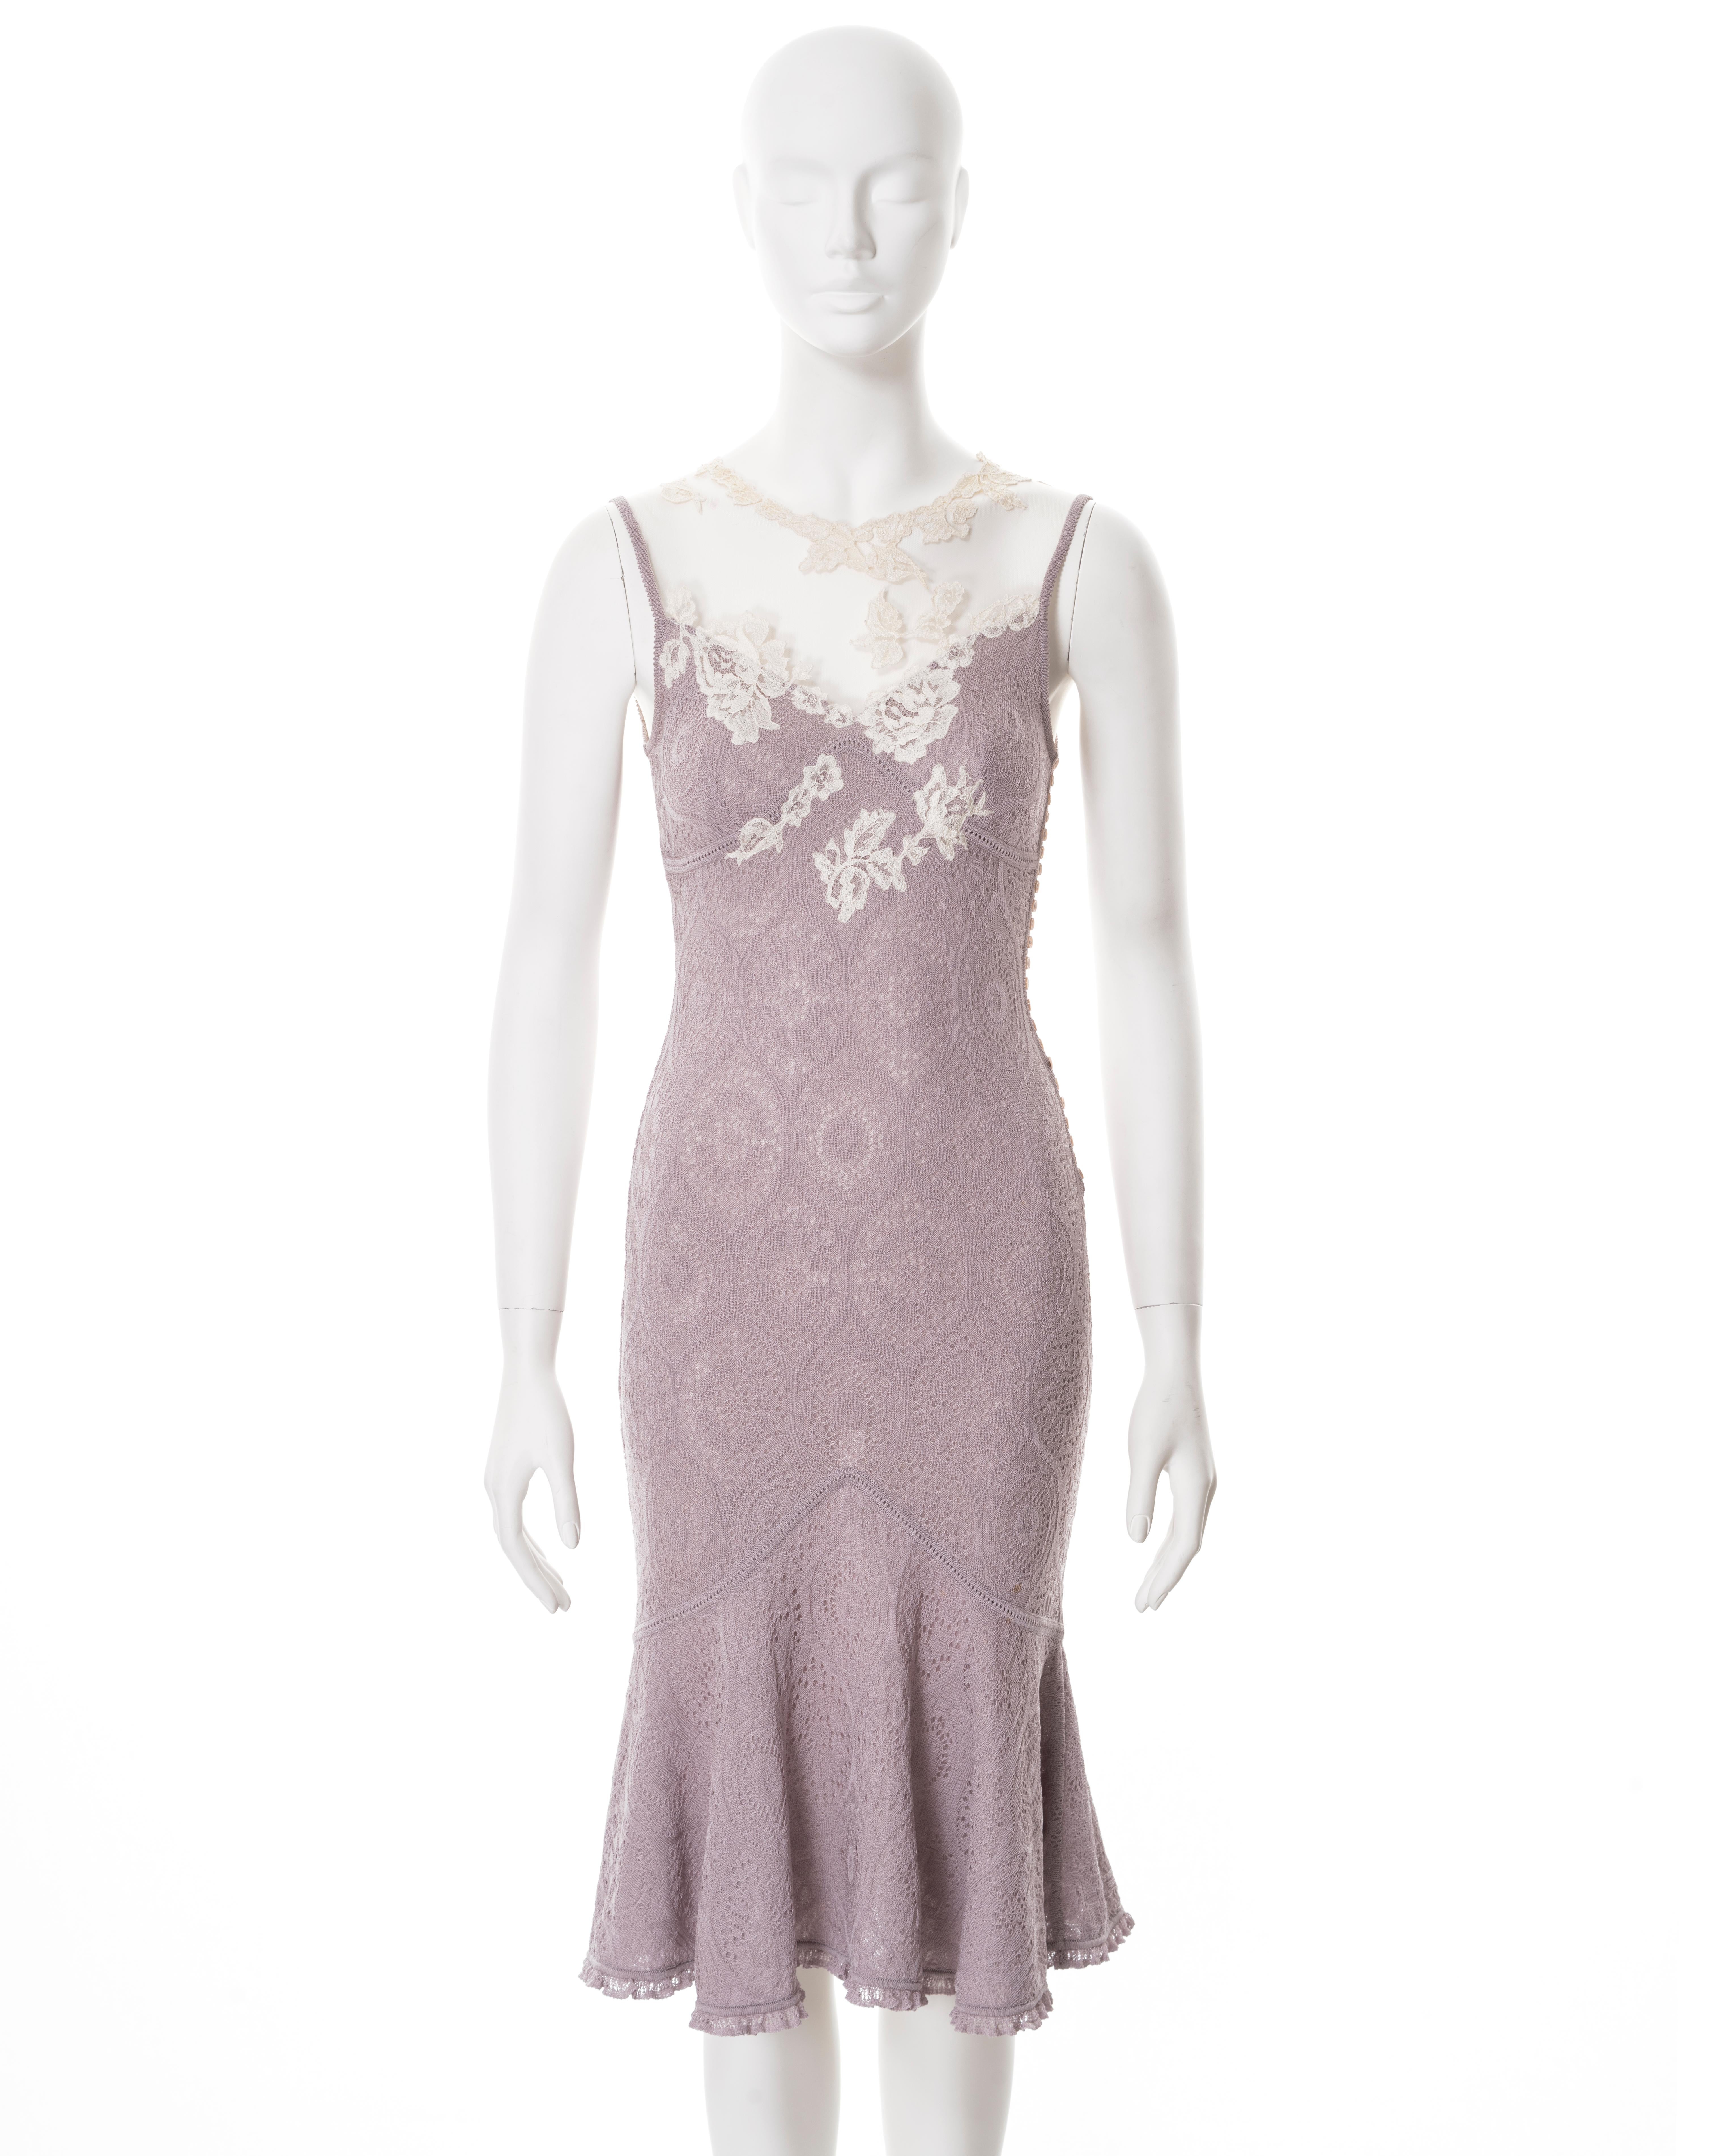 ▪ John Galliano dress
▪ Sold by One of a Kind Archive
▪ Spring-Summer 1998
▪ Constructed from lilac viscose knitted lace 
▪ Ivory mesh with lace appliqués 
▪ Multiple button closures 
▪ Flounce skirt 
▪ Size approx. Small
▪ Made in France  

All